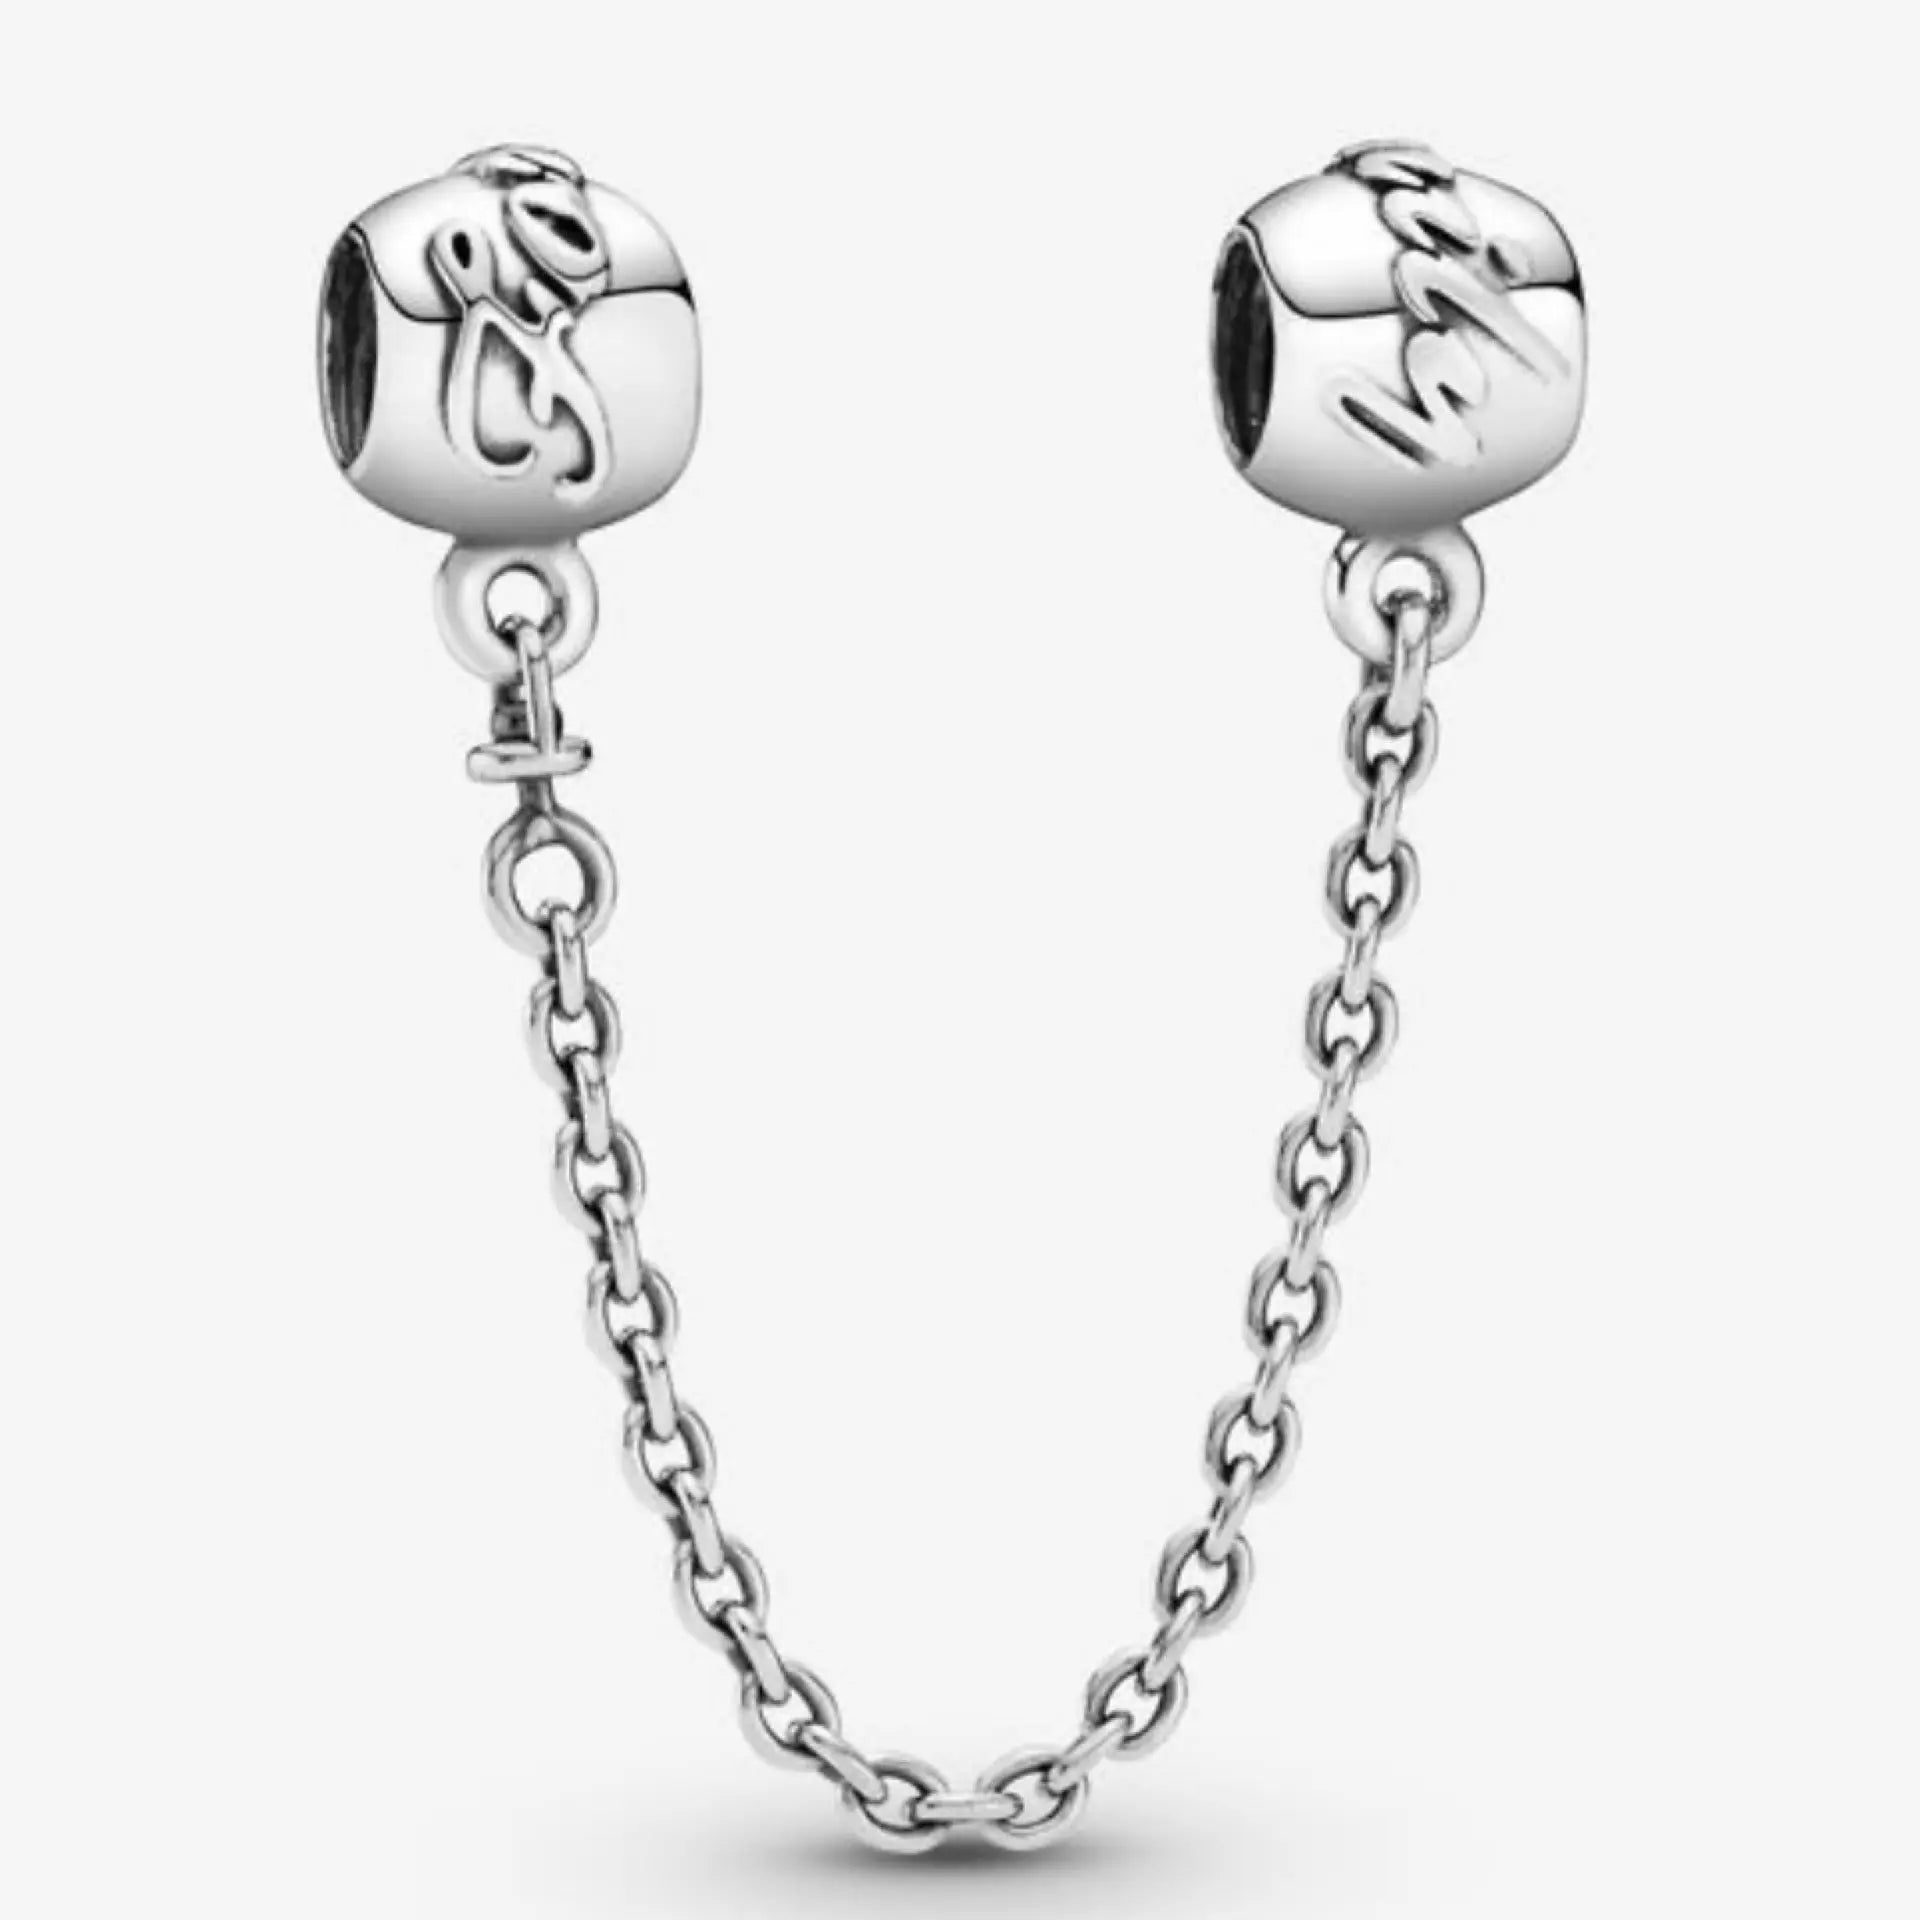 Pandora Family Forever Safety Chain Charm - Danson Jewelers Silver Jewelry 